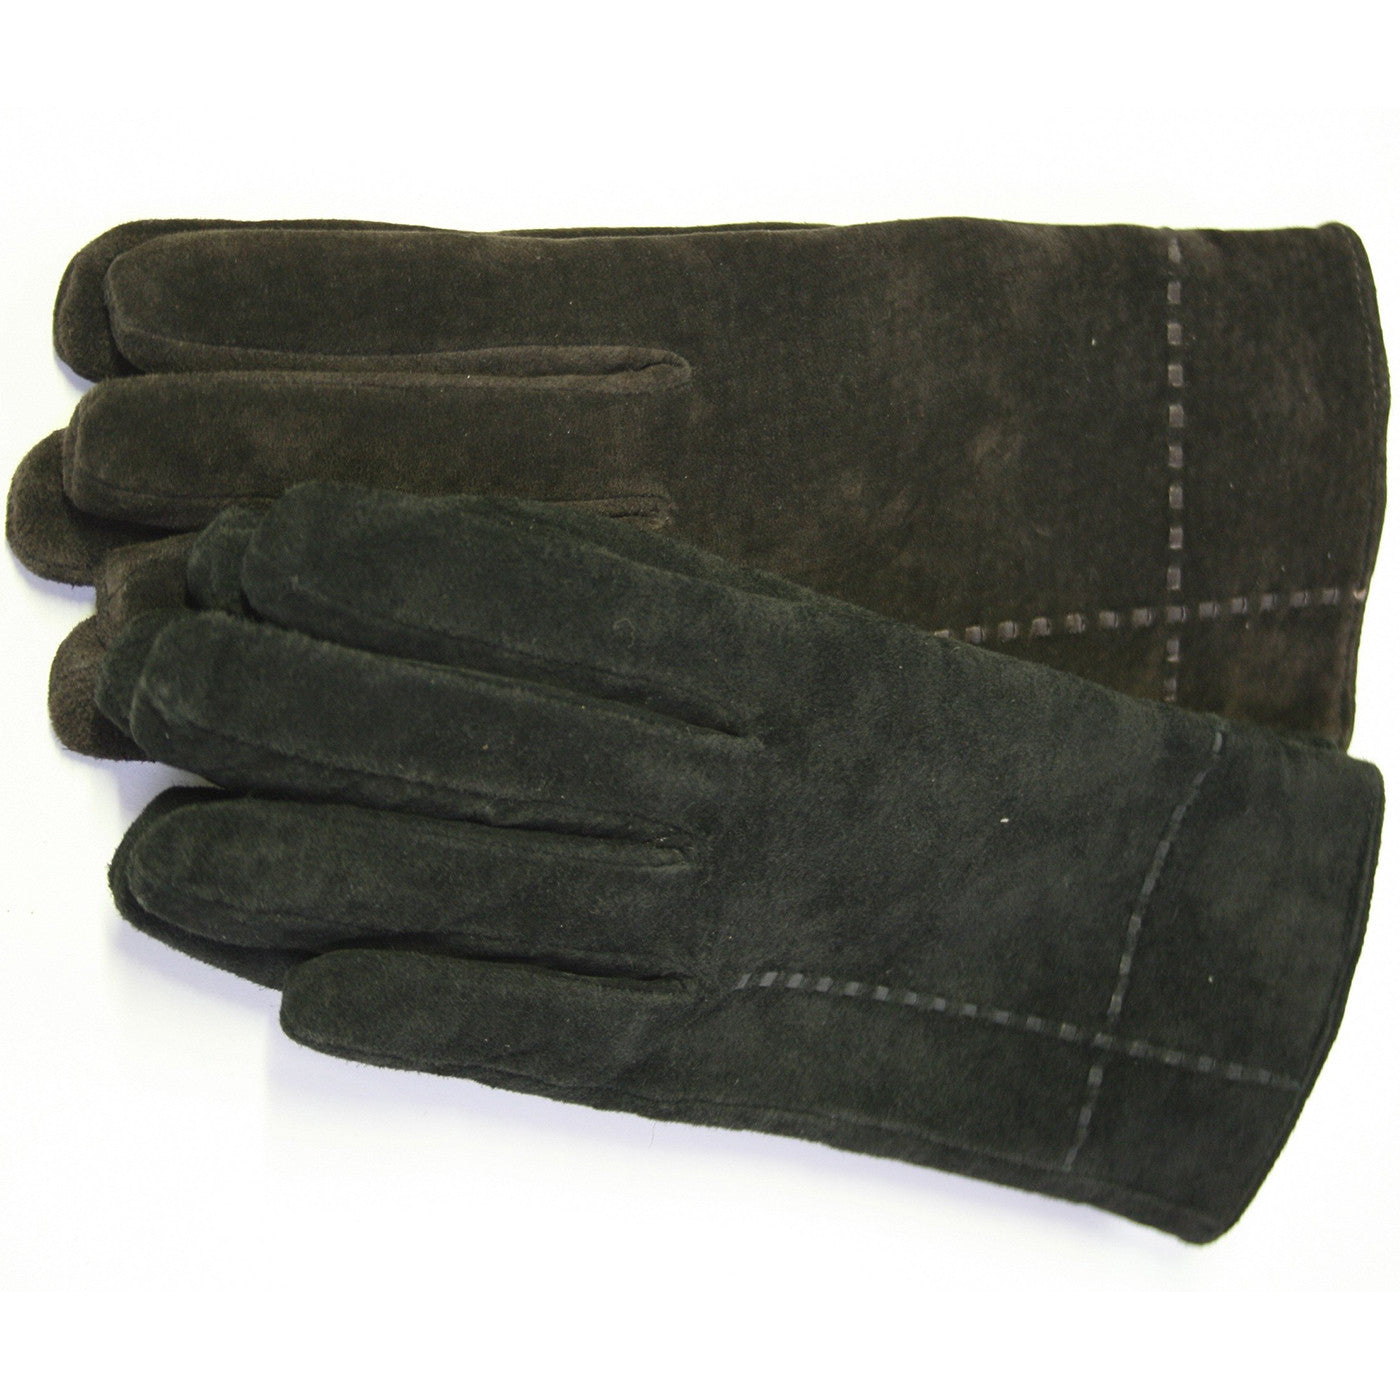 Sheer Bliss Suede Gloves